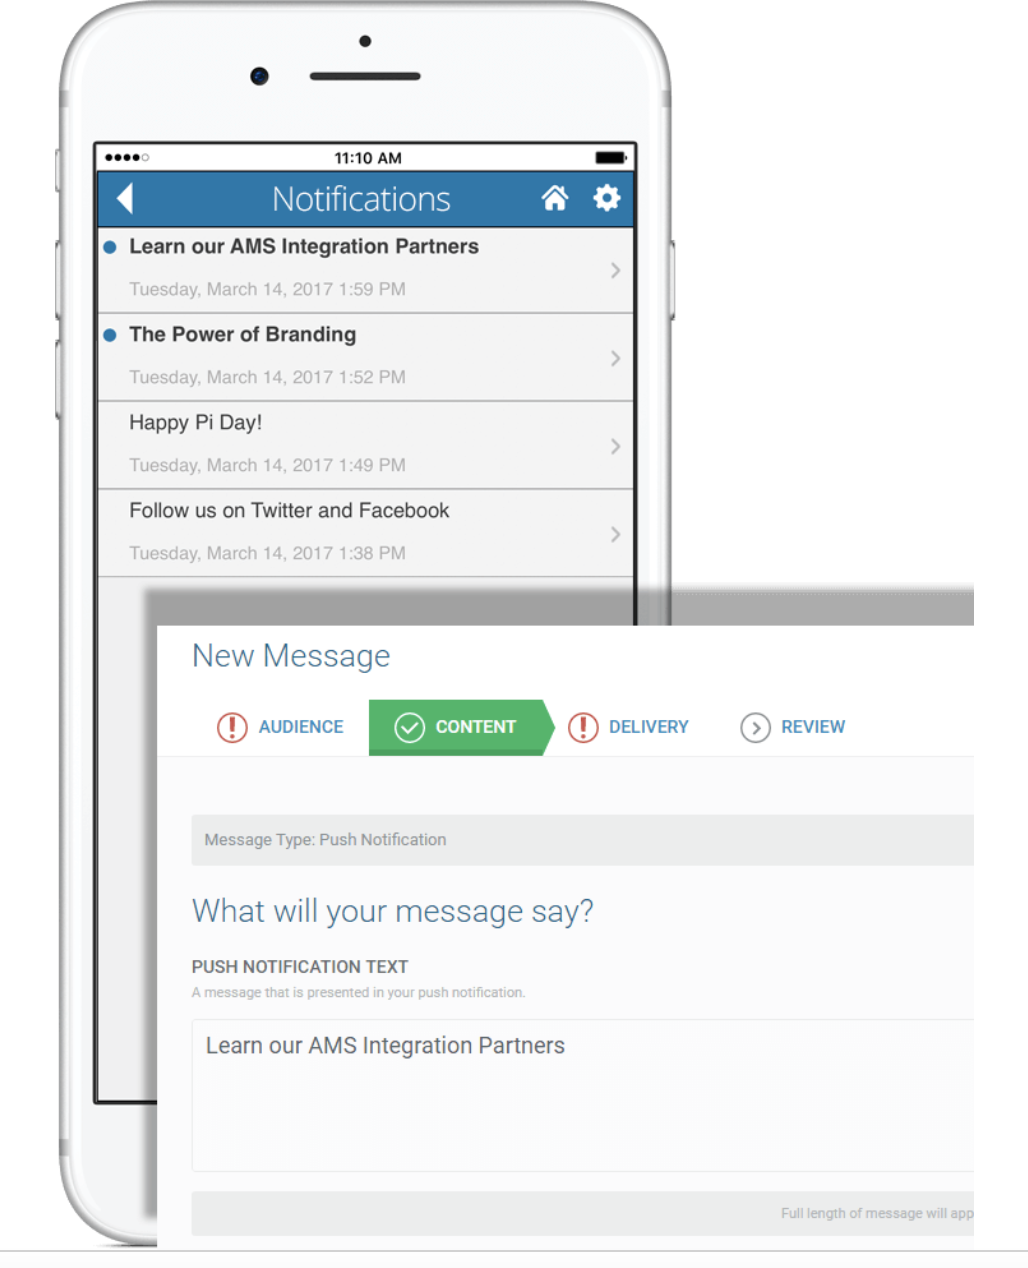 Send push notifications directly to the mobile devices of members